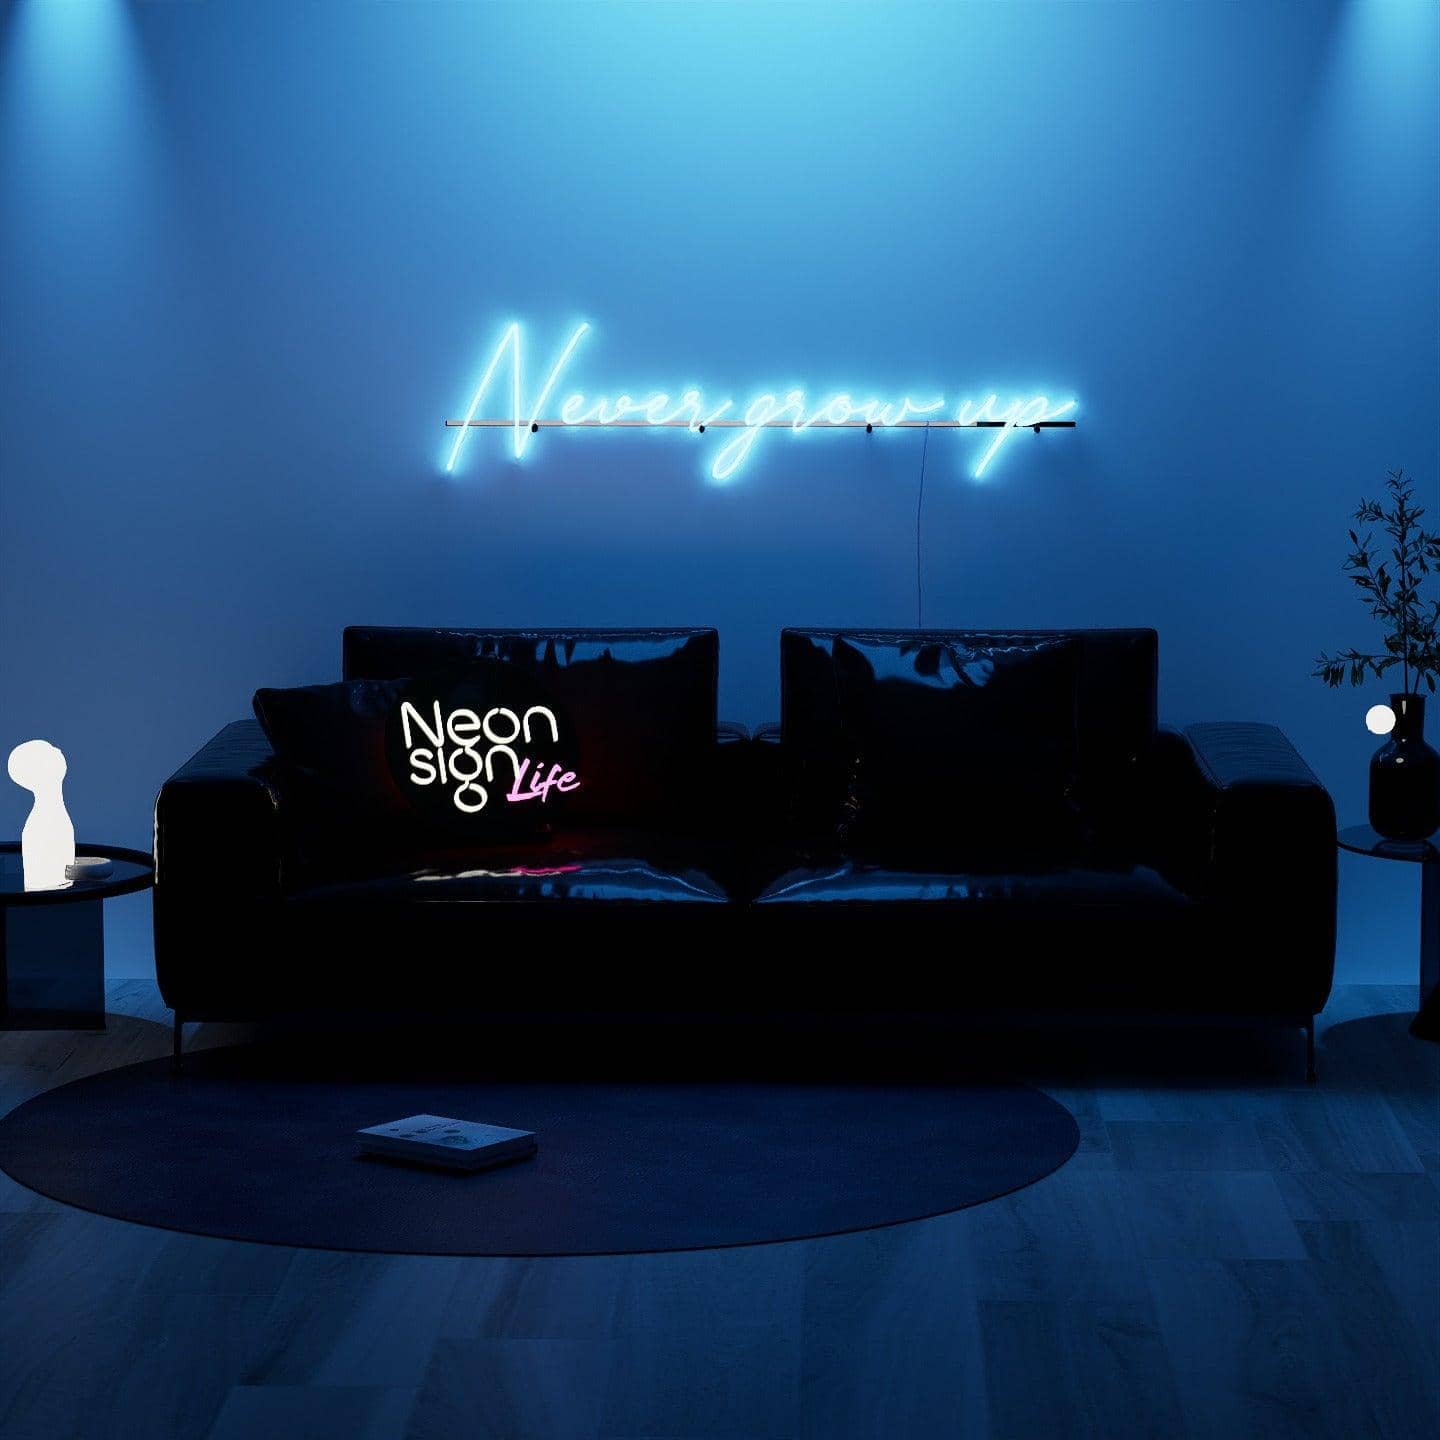 dark-night-lit-blue-neon-lights-hanging-on-the-wall-for-display-never-grow-up